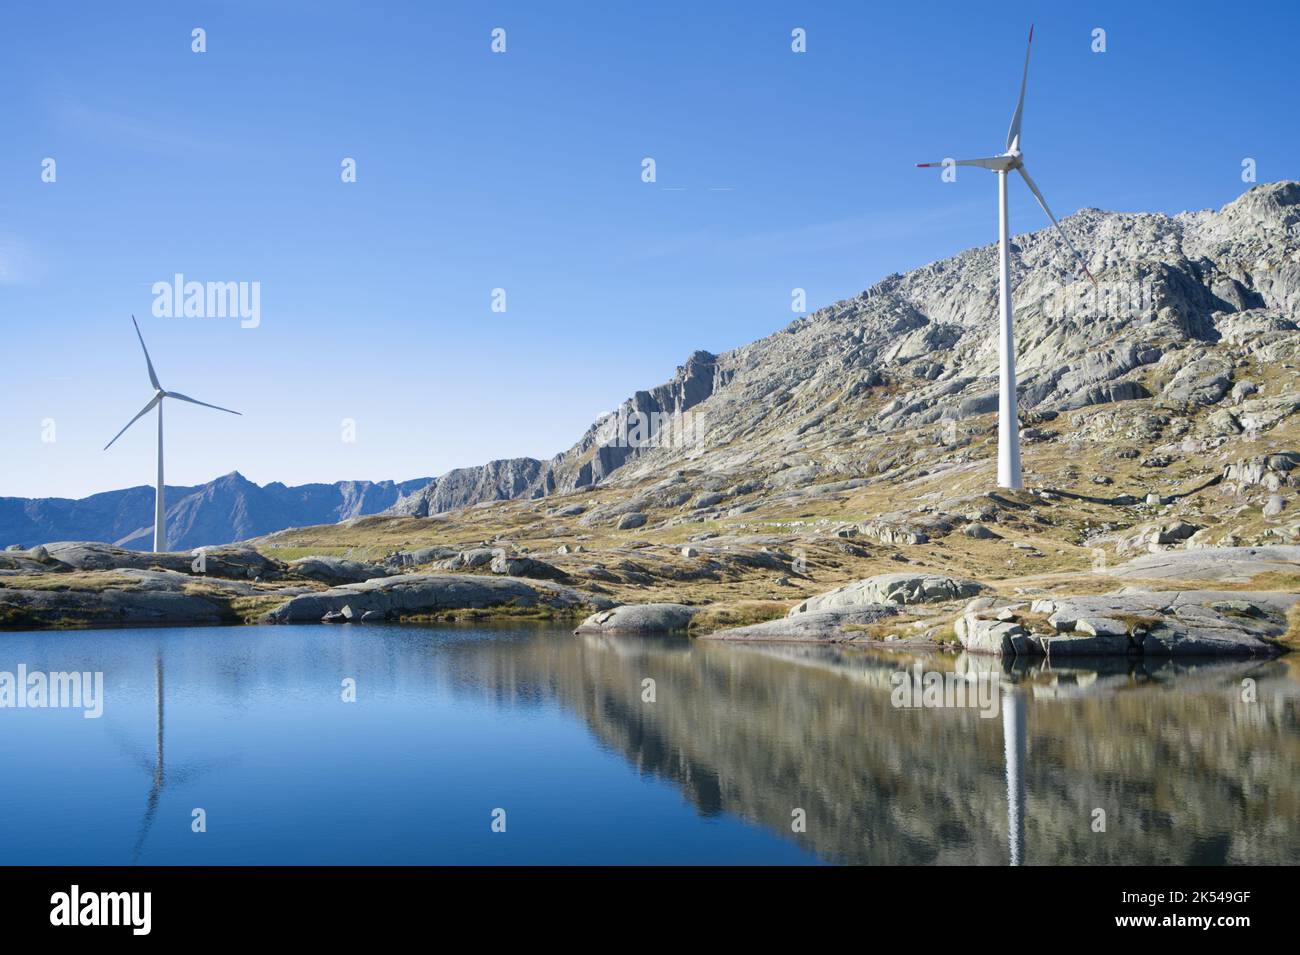 Lake in the Swiss mountains with wind turbines Stock Photo